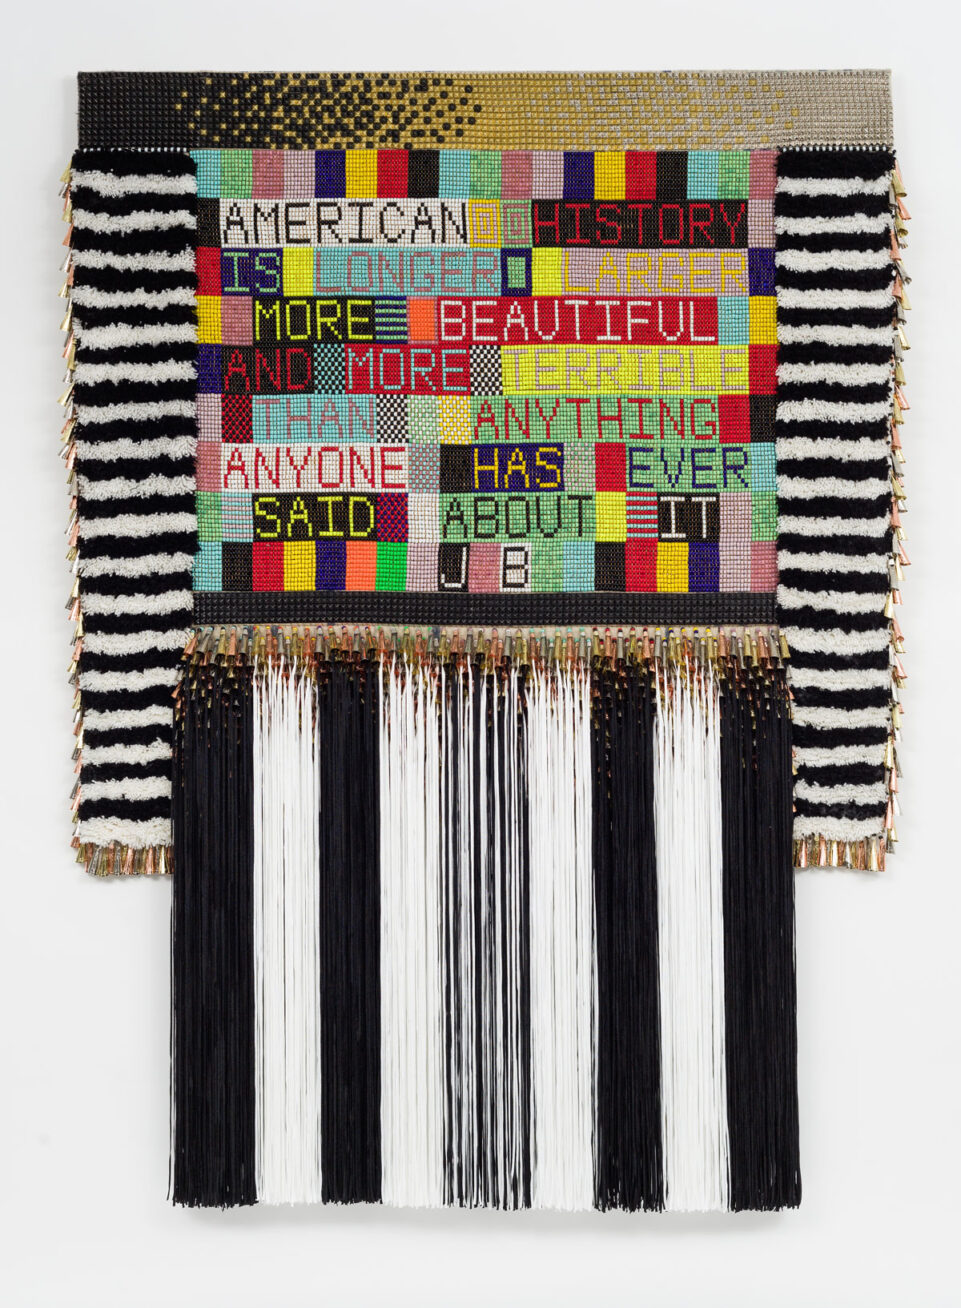 Jeffrey Gibson, AMERICAN HISTORY, 2015. Wool, steel studs, glass beads, artificial sinew, metal jingles, acrylic yarn, nylon fringe, canvas. 89 x 66 x 5 inches and 226.1 x 167.6 x 12.7 cm. Photo by: Pete Mauney.